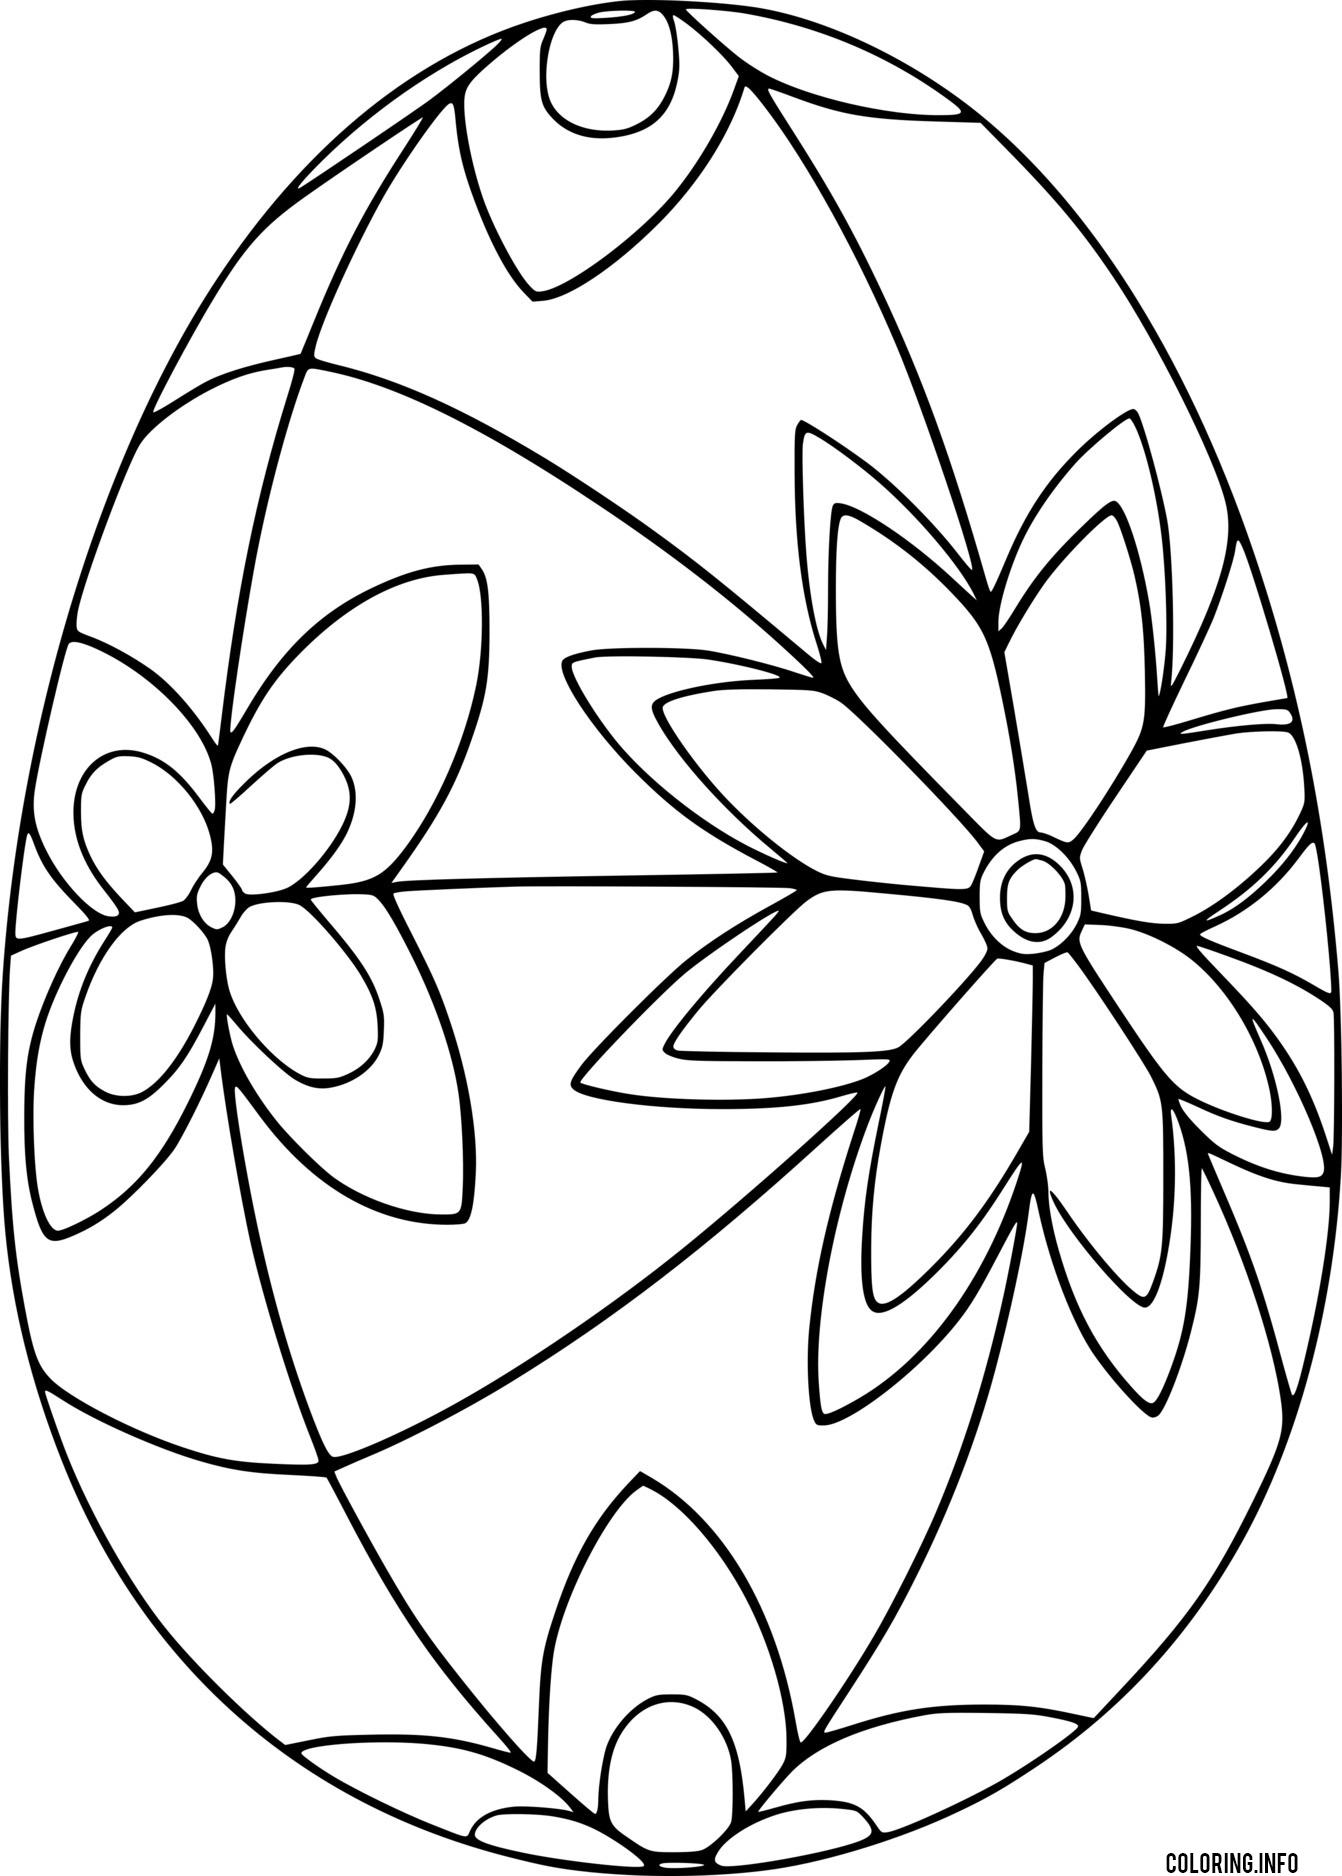 Butterfly Patterns Easter Egg coloring